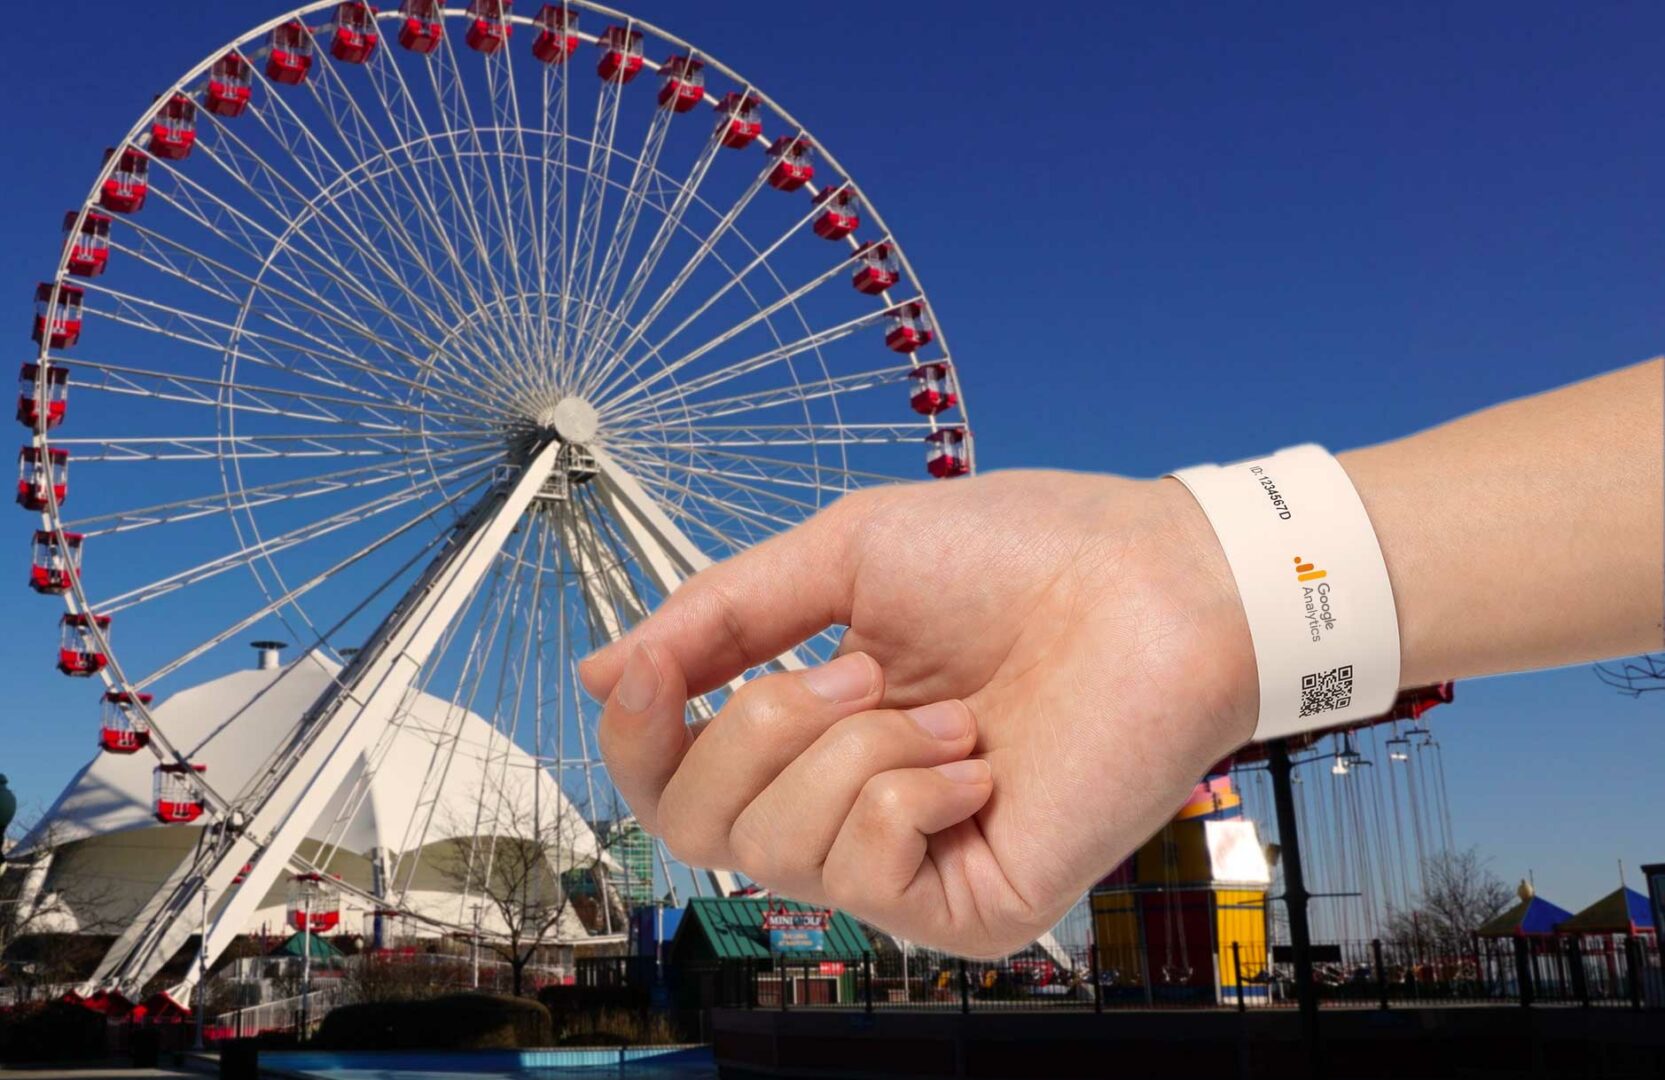 A Google Analytics wristband on a wrist with a theme park in the background